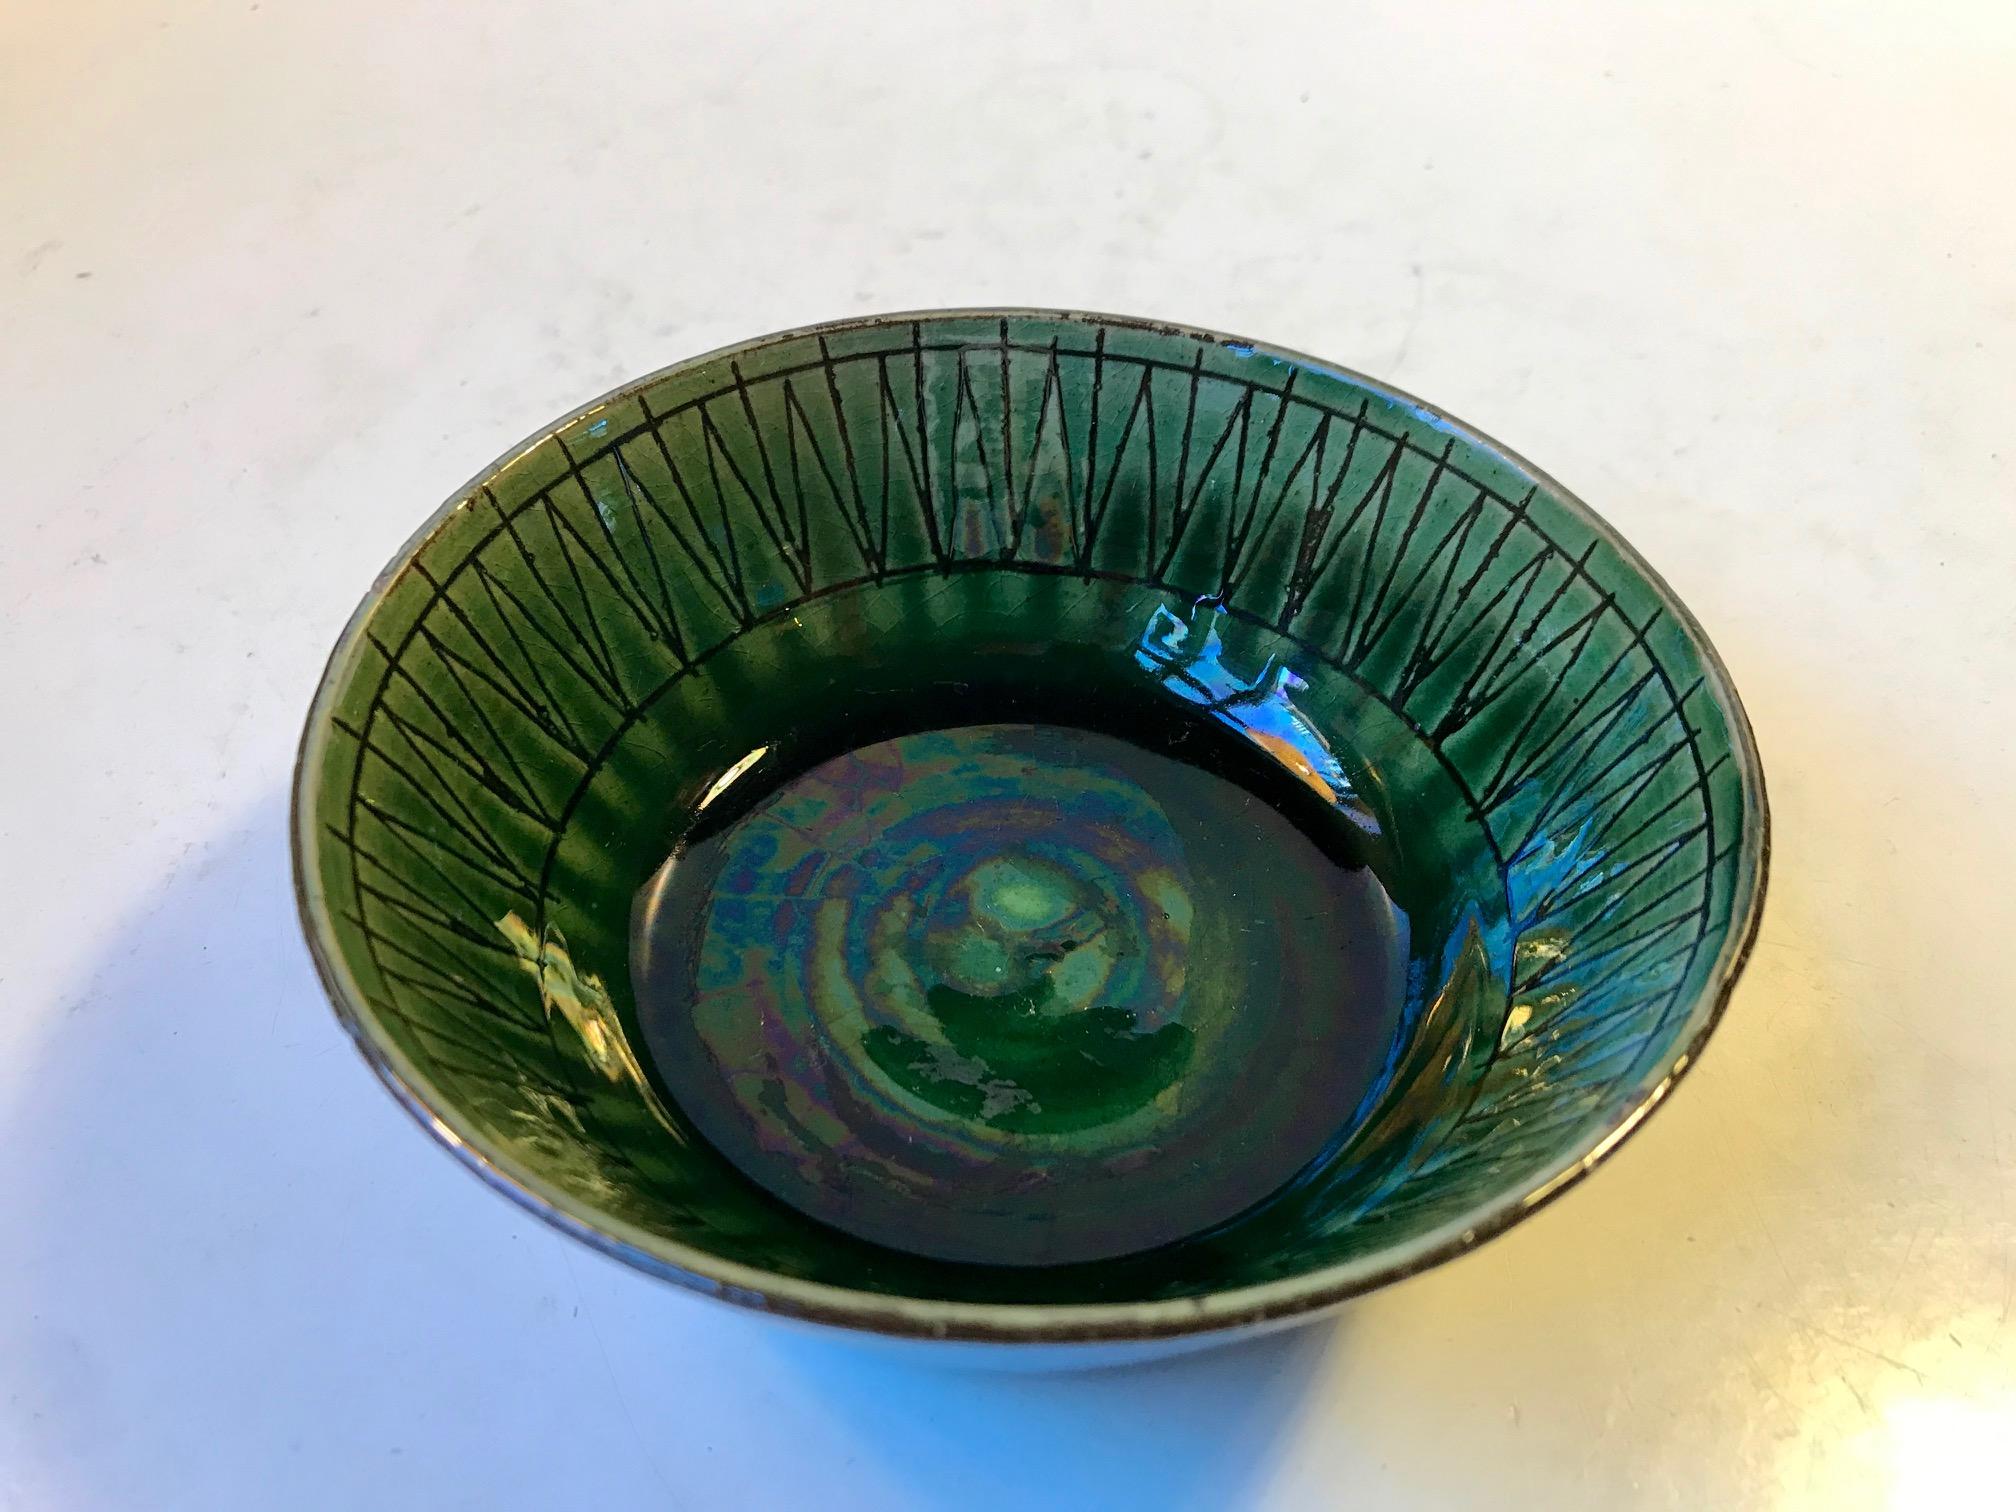 Small ceramic bowl with oily green glaze and geometric arrow incisions. Designed by the Danish ceramist Thomas Toft and manufactured at his own studio during the early 1960s. It is signed to its base.